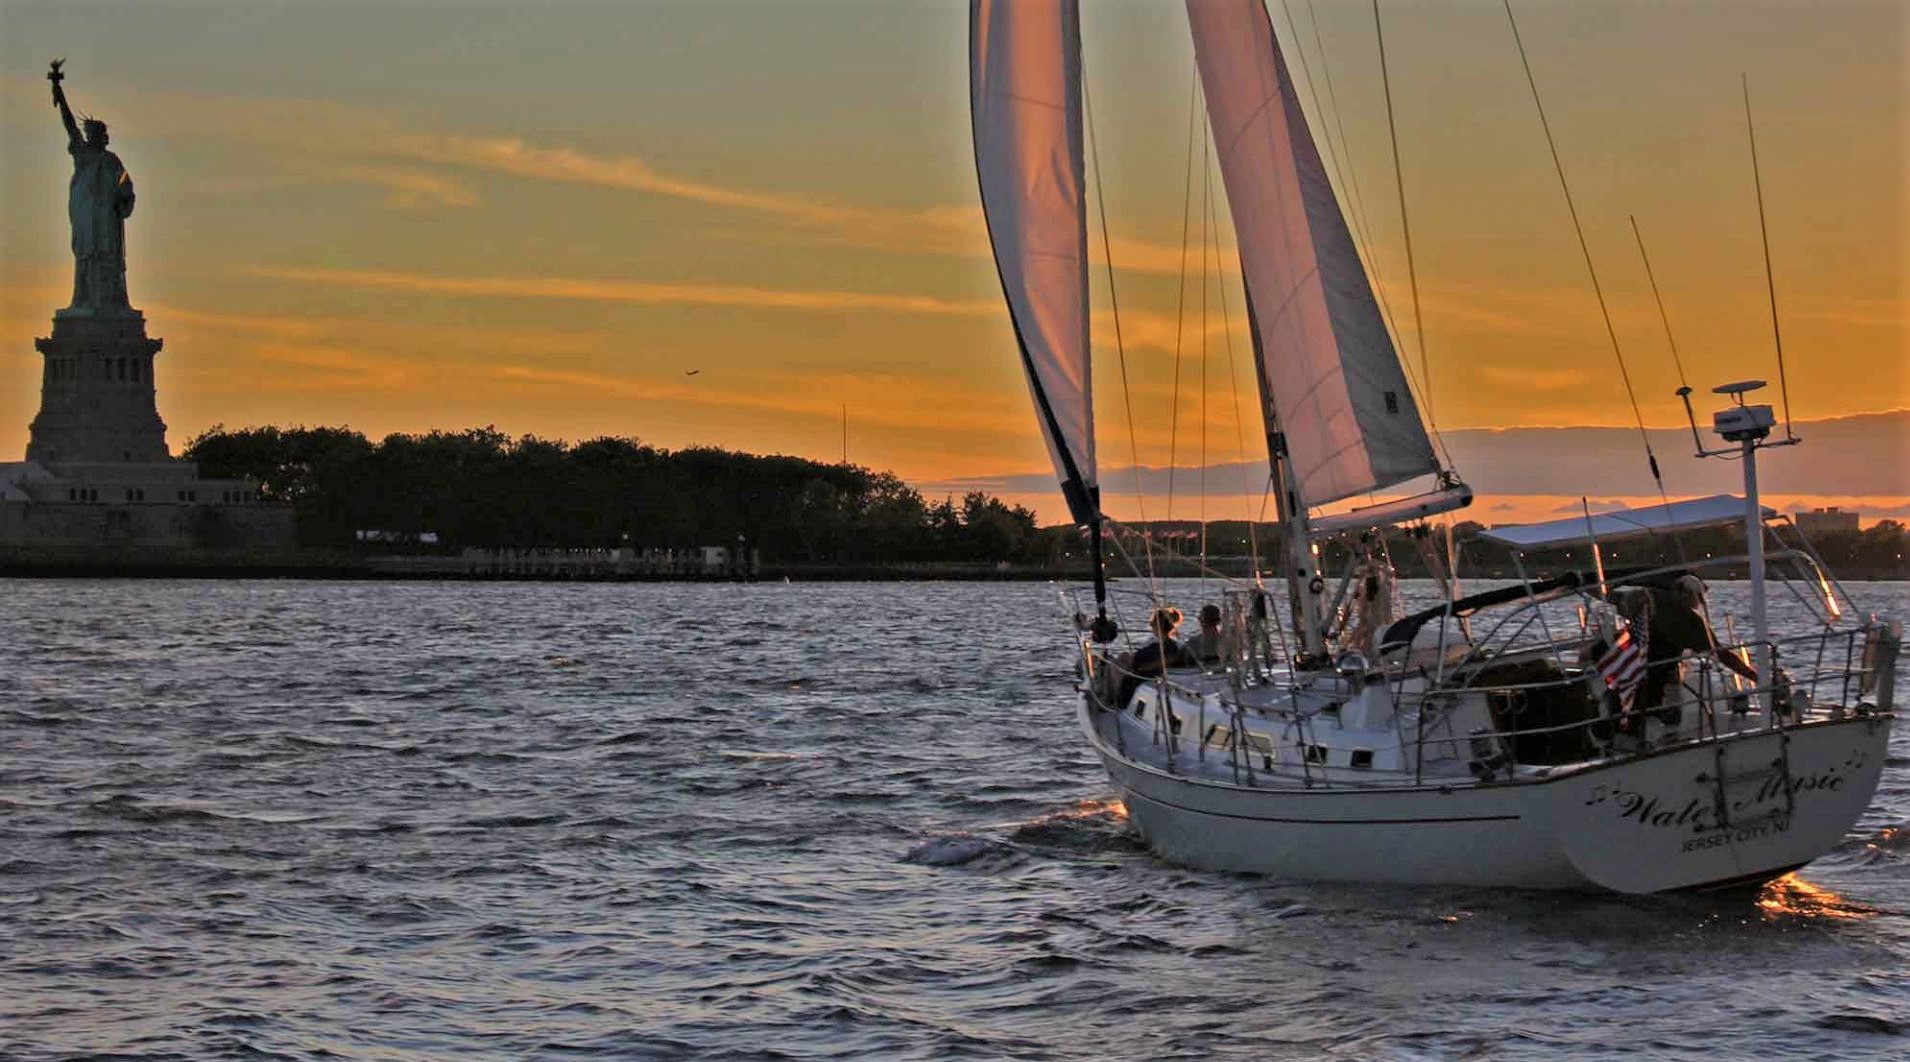 Water Music sailing yacht NY by water Pynck sunset (2) cropped.jpg